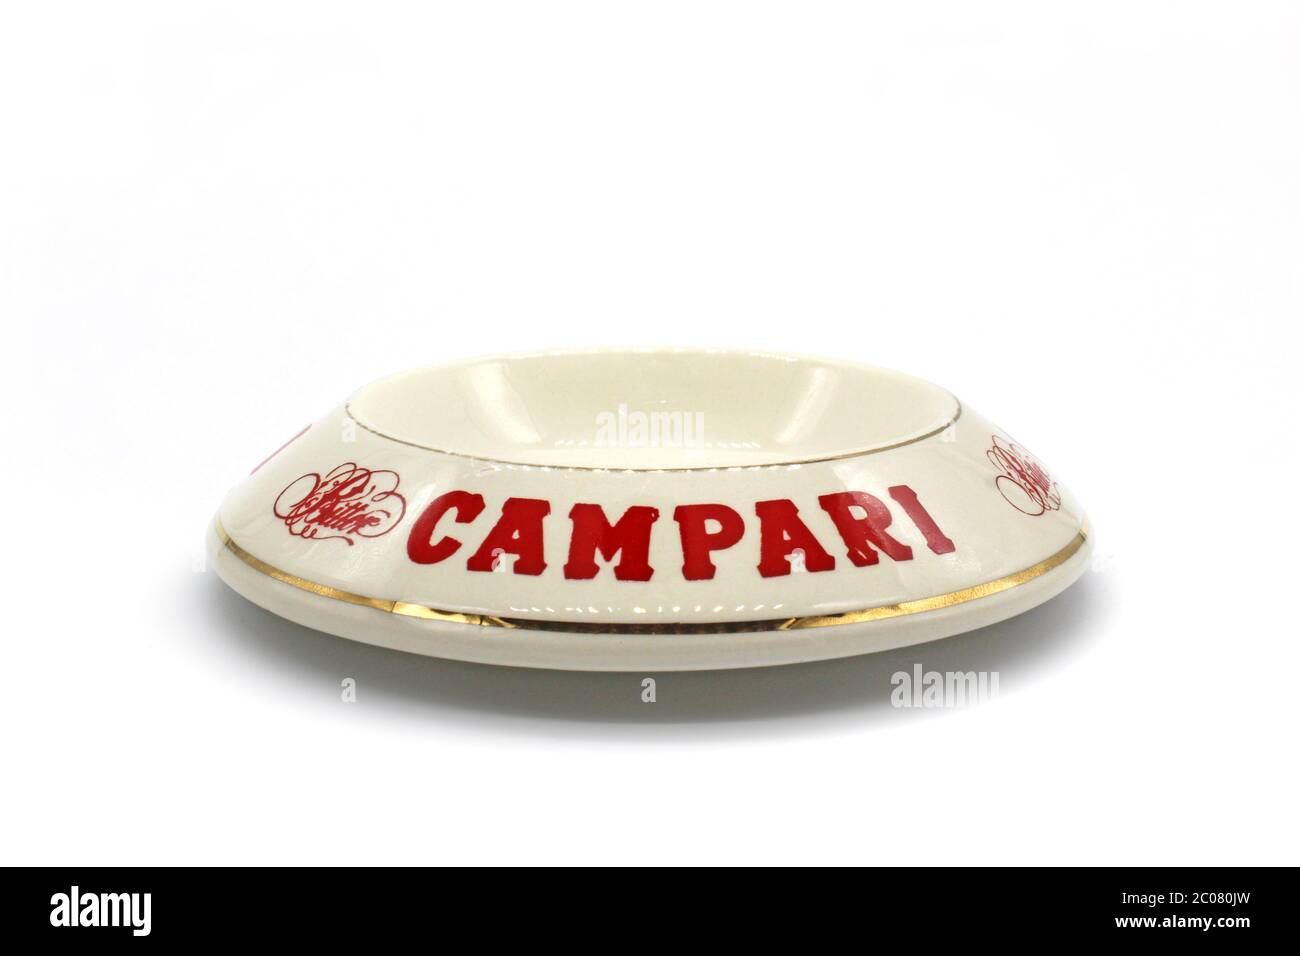 Ceramic ashtray with Campari, isolated on a white background, close up Stock Photo